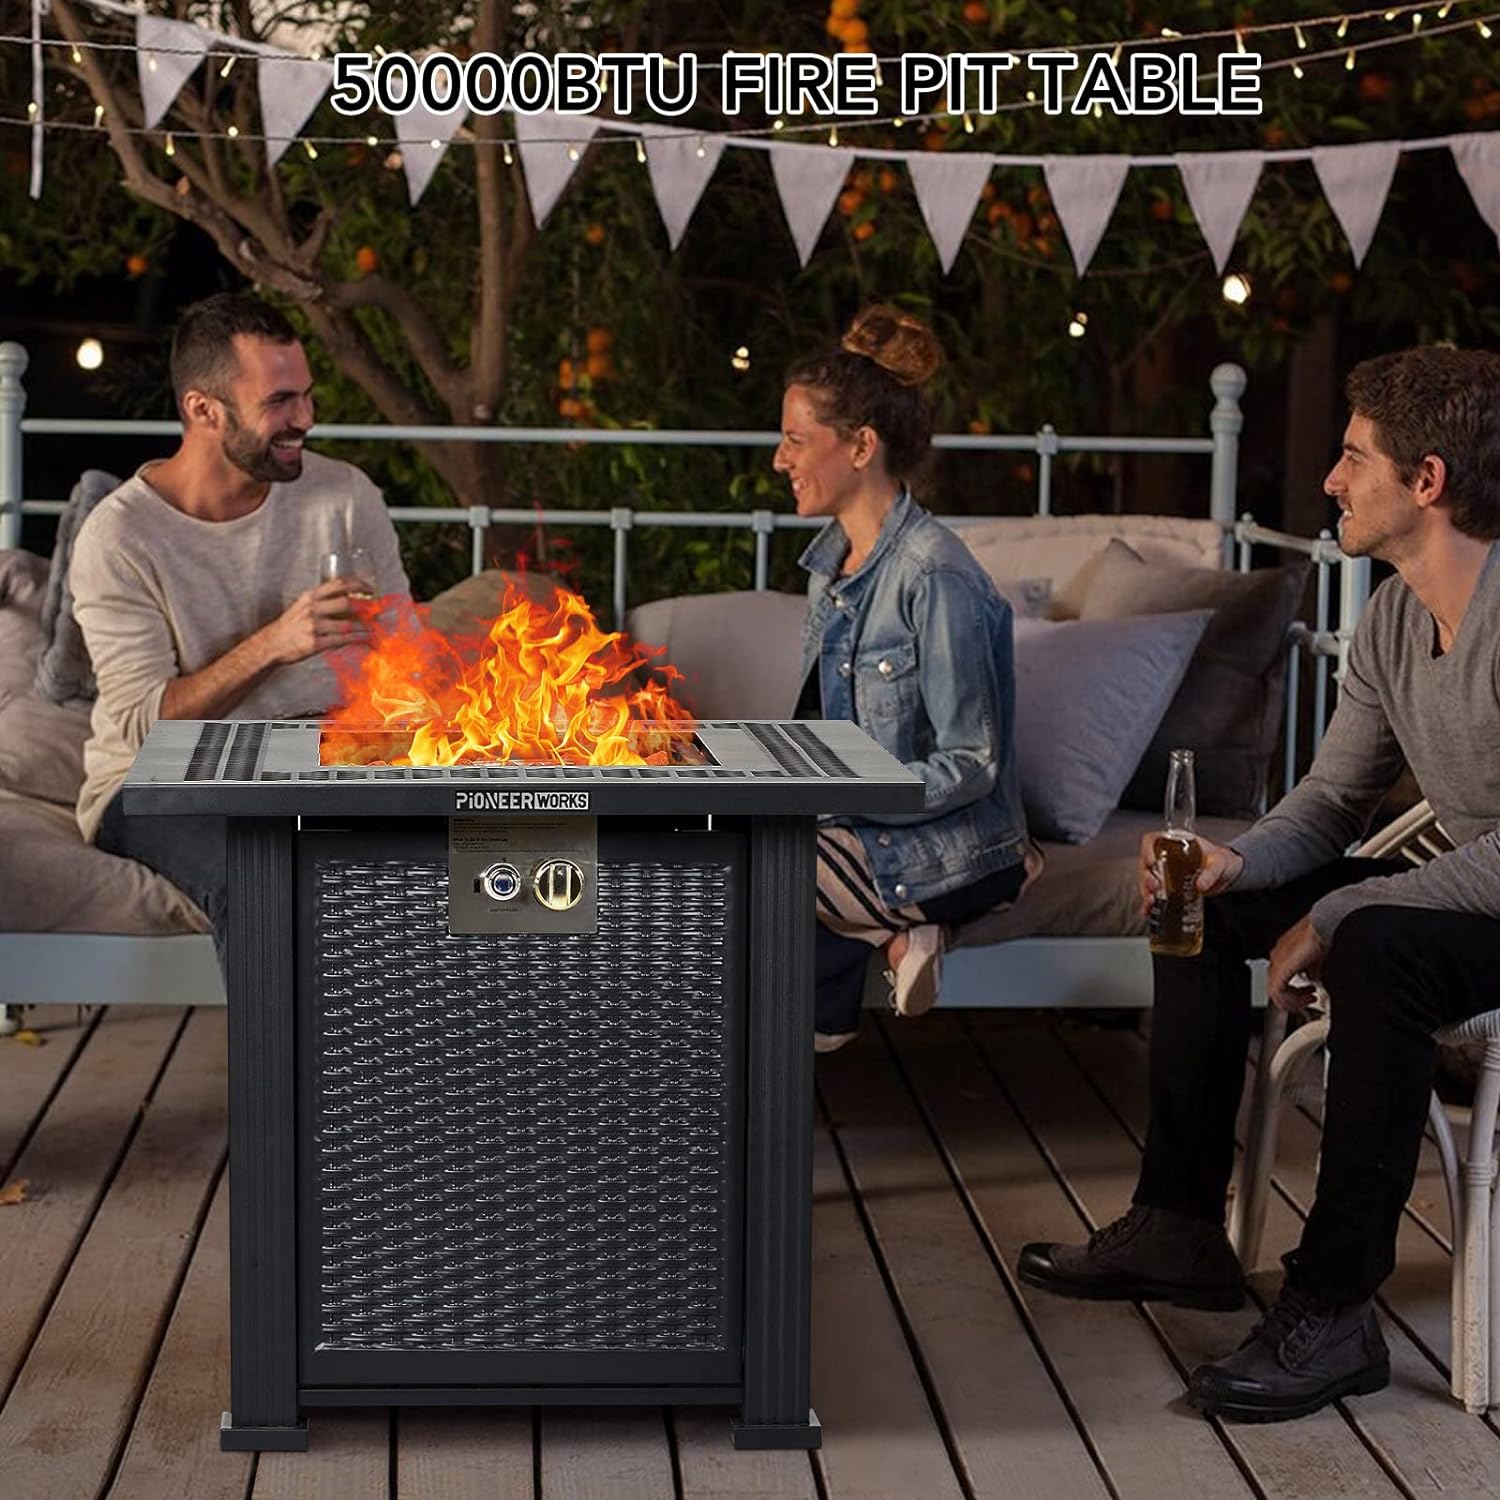 PioneerWorks 50000BTU Rectangle Fire Table Review